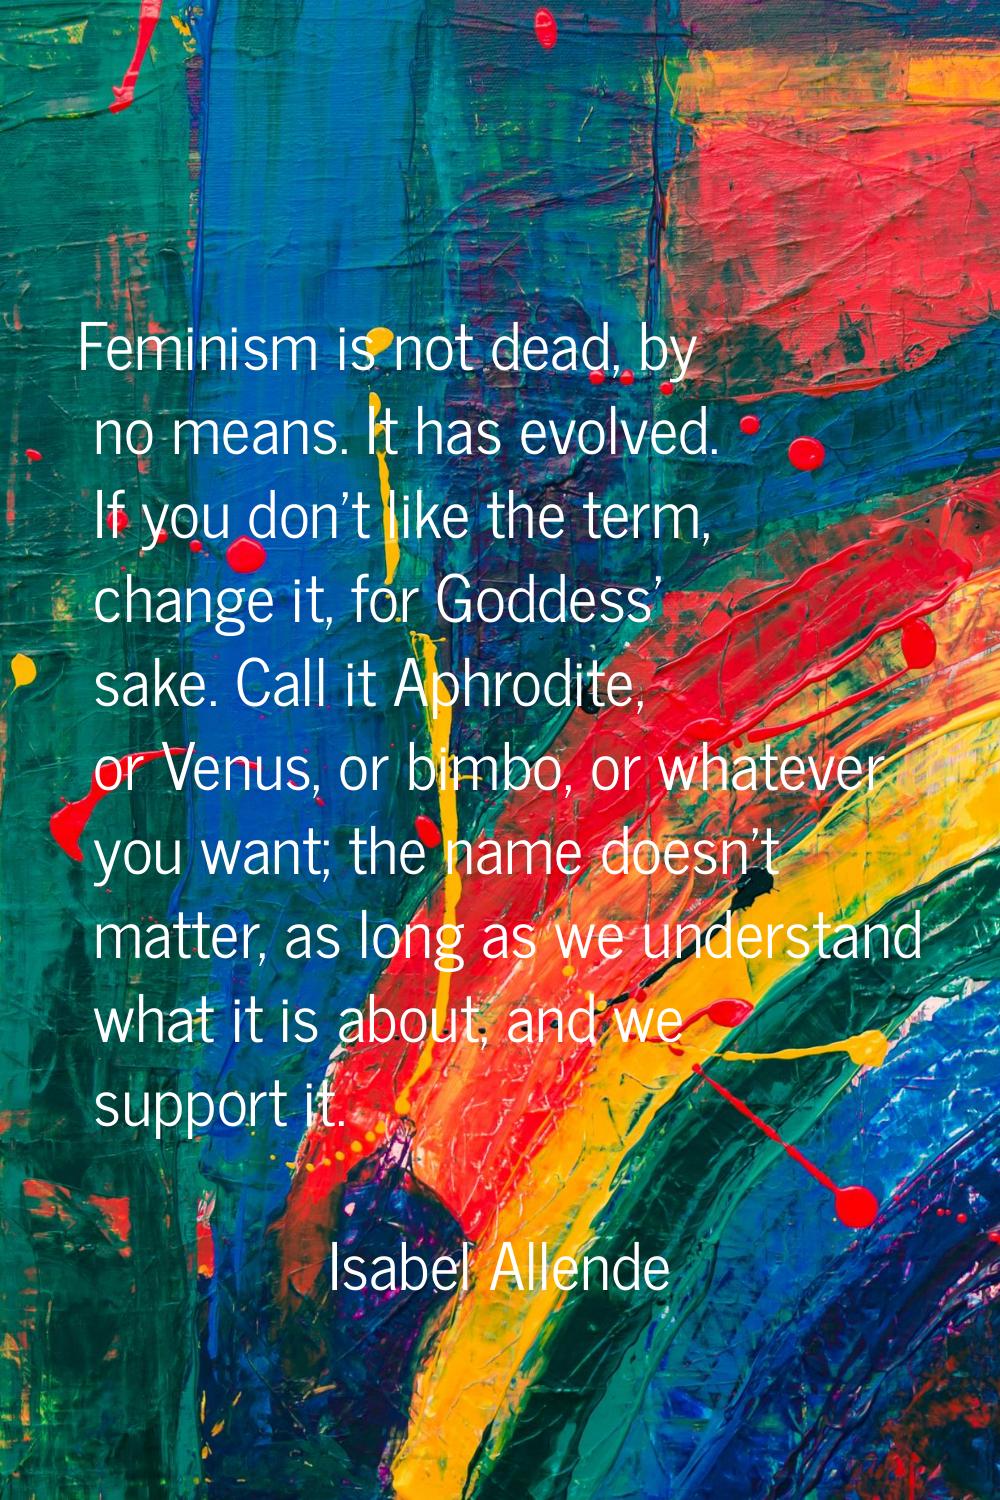 Feminism is not dead, by no means. It has evolved. If you don't like the term, change it, for Godde